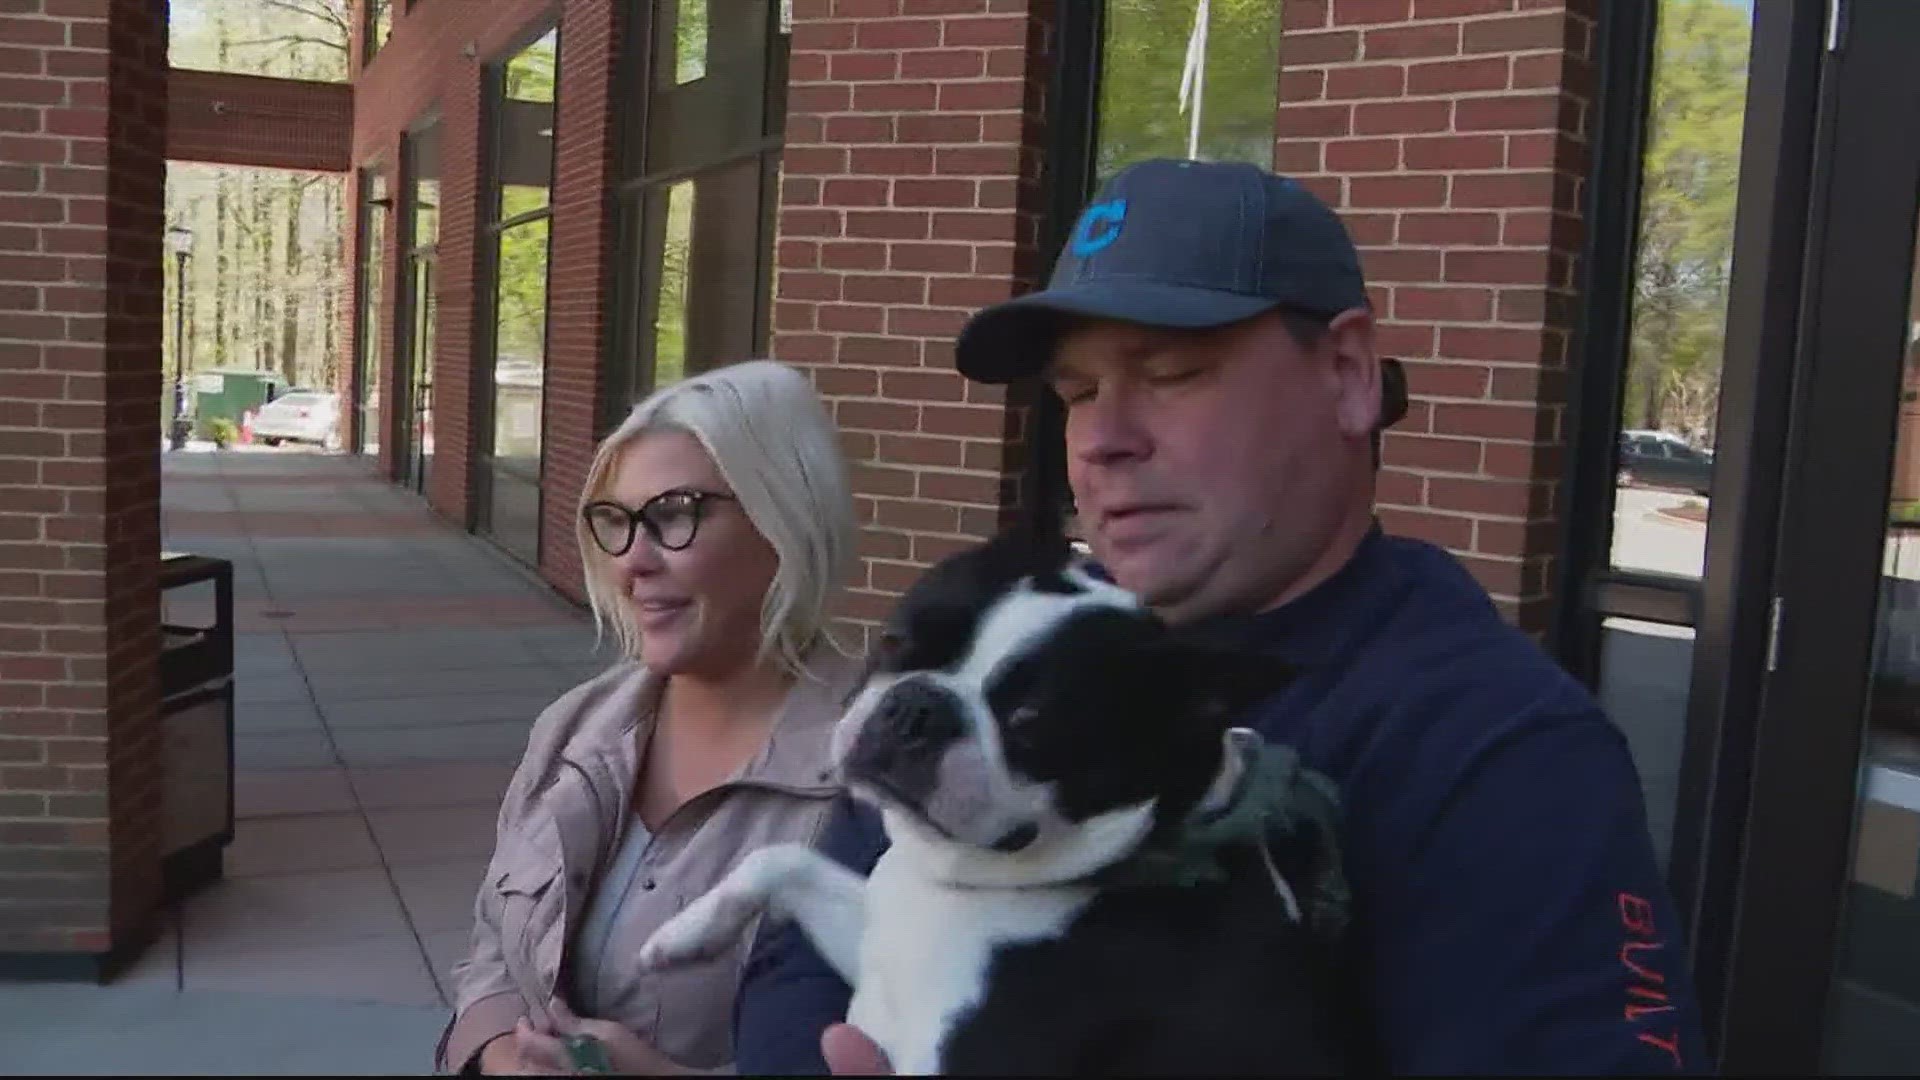 A family in Prince George's County has been reunited with their furry friend weeks after the car the dog was riding in was stolen from a gas station.